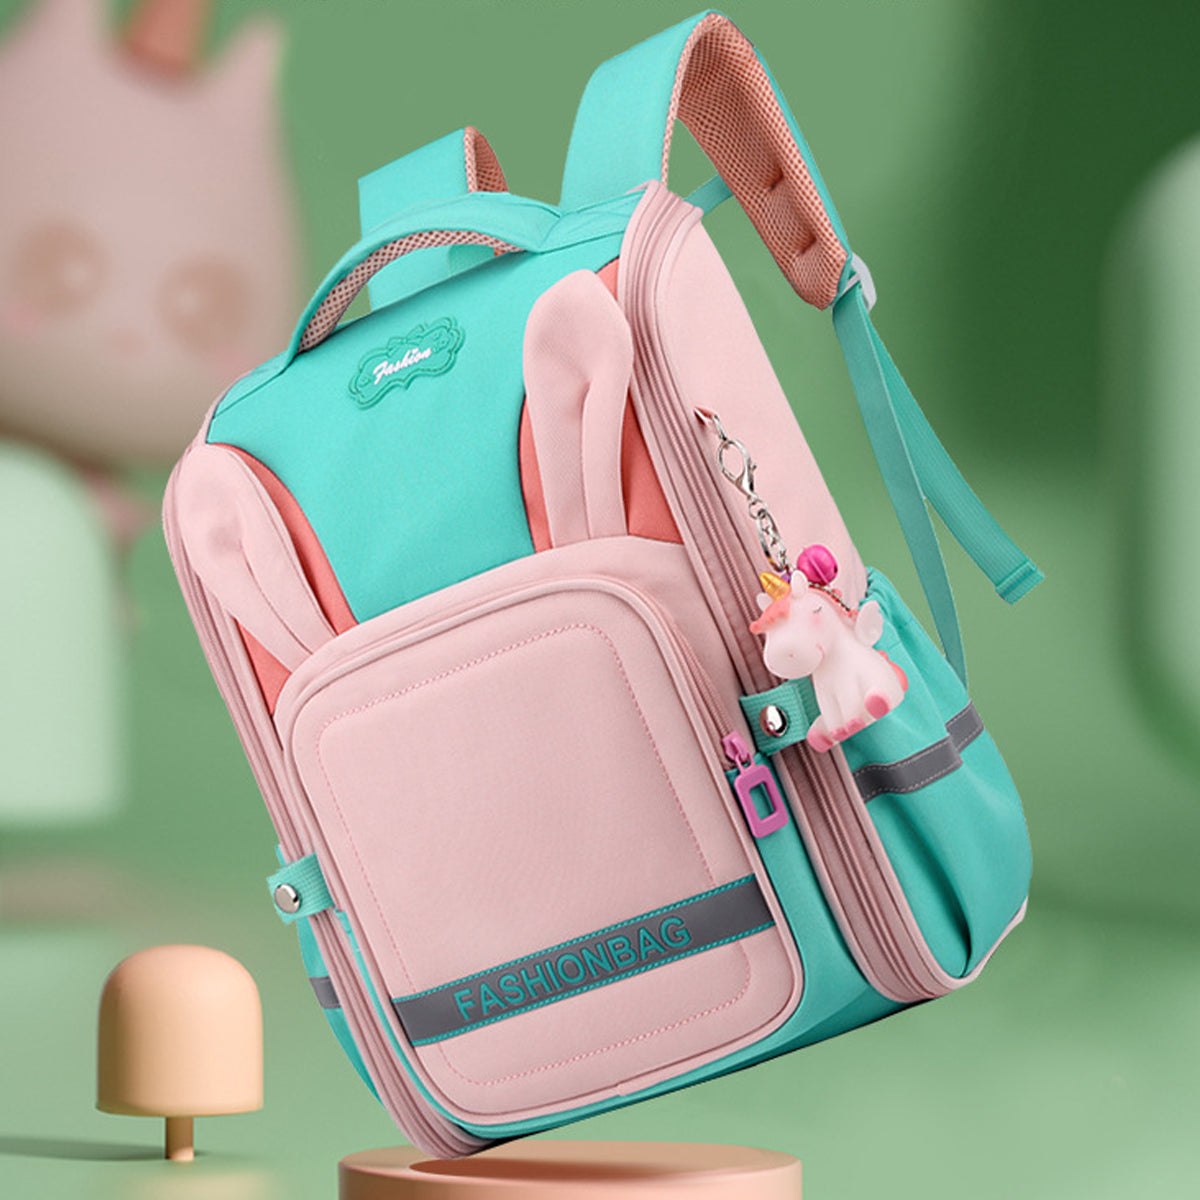 Multicolor Cute Ridge Protector Backpack for Children